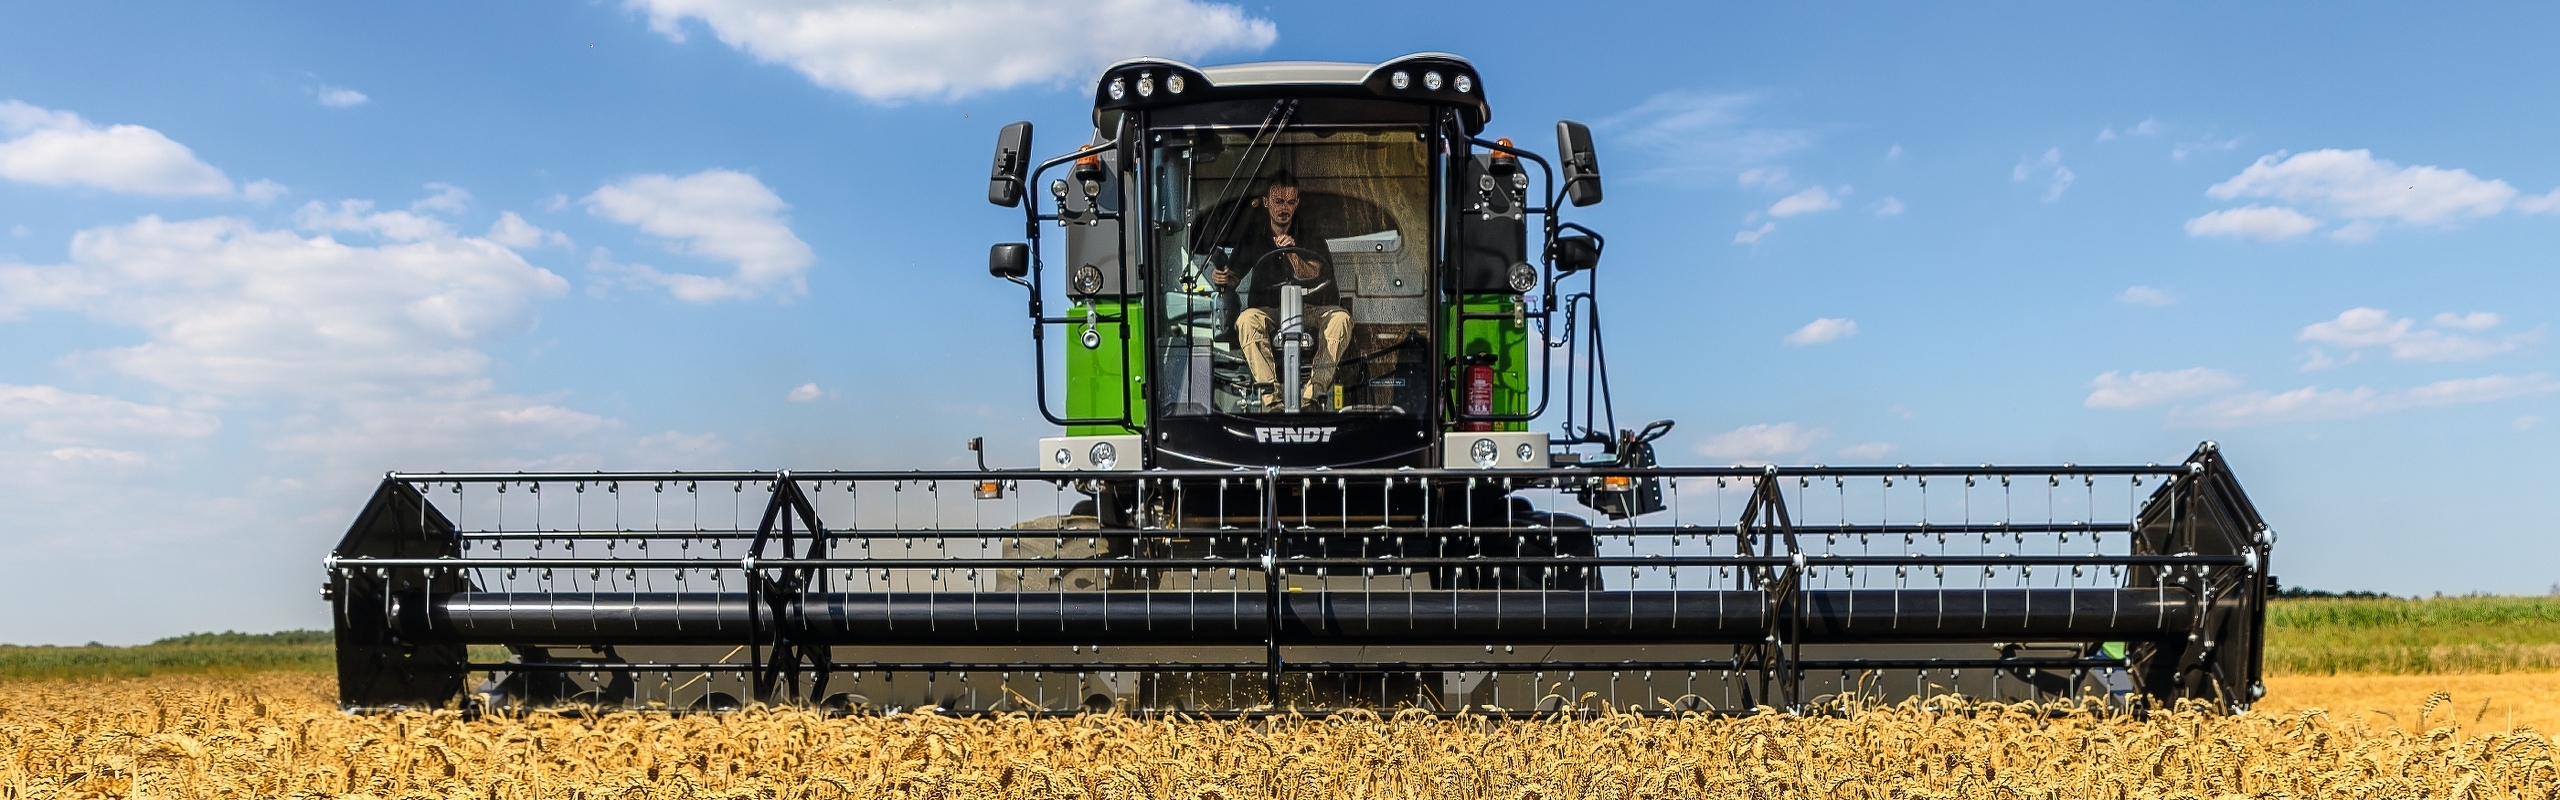 A farmer threshing in a wheat field with his Fendt CORUS combine harvester